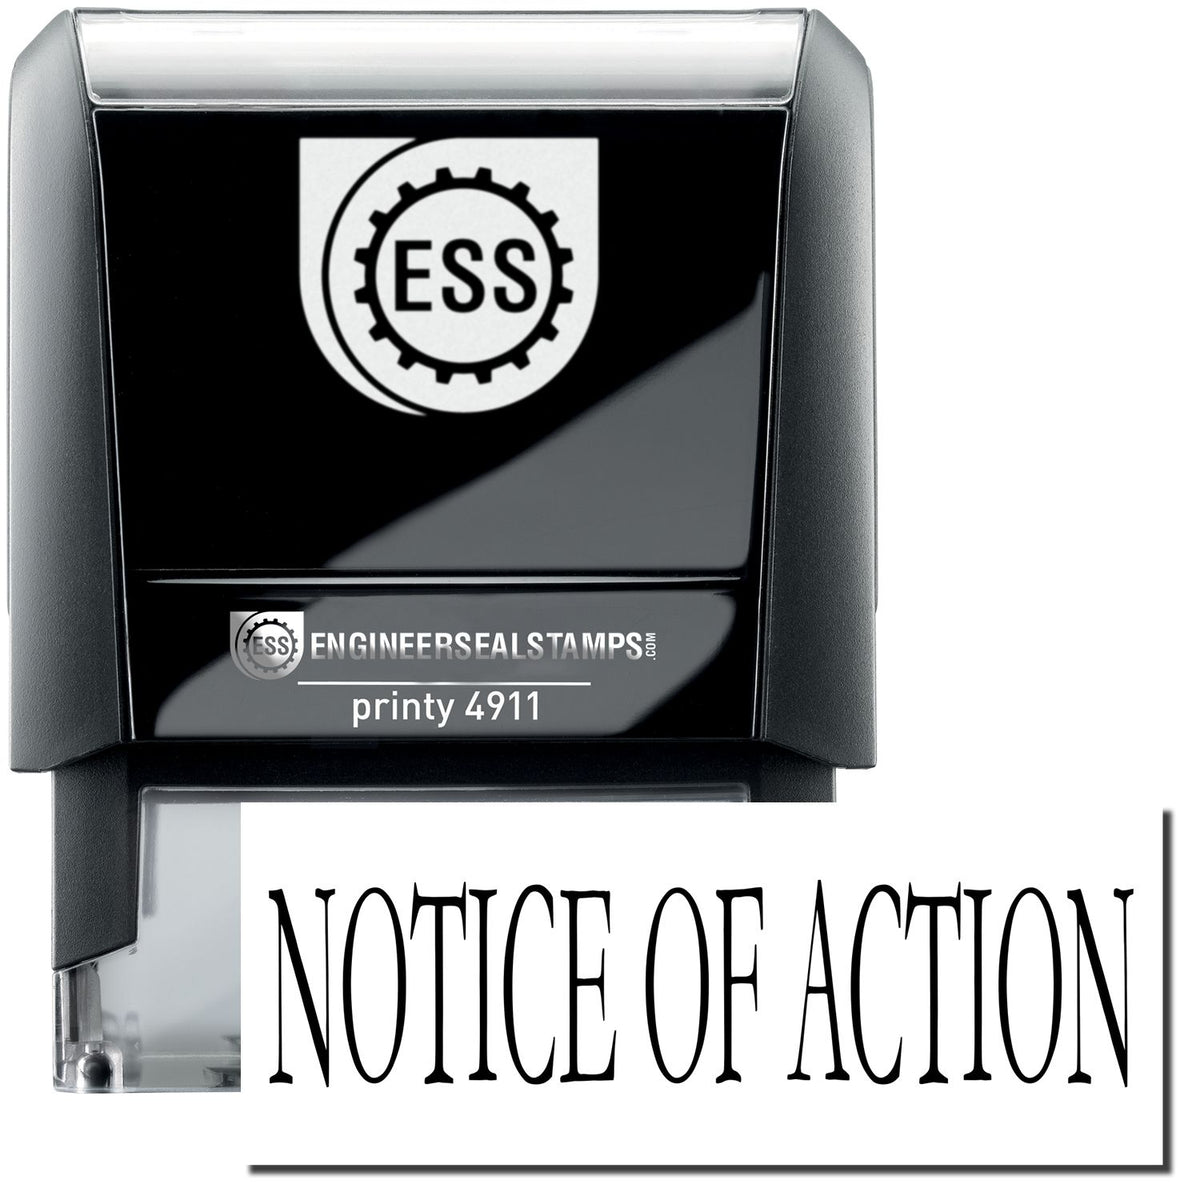 A self-inking stamp with a stamped image showing how the text &quot;NOTICE OF ACTION&quot; is displayed after stamping.